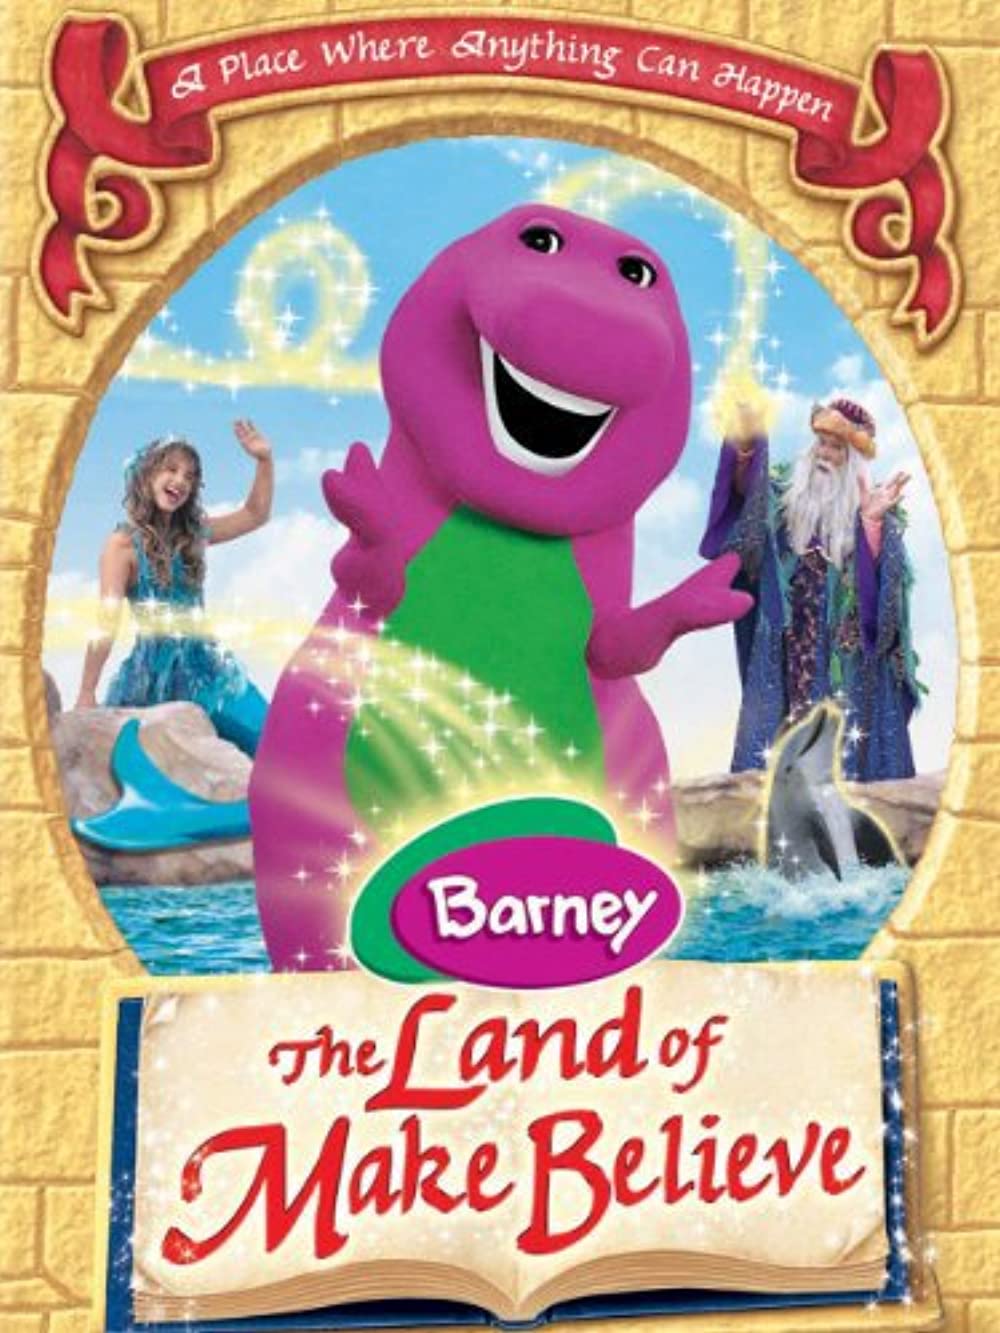 Download Barney: The Land of Make Believe Movie | Barney: The Land Of Make Believe Movie